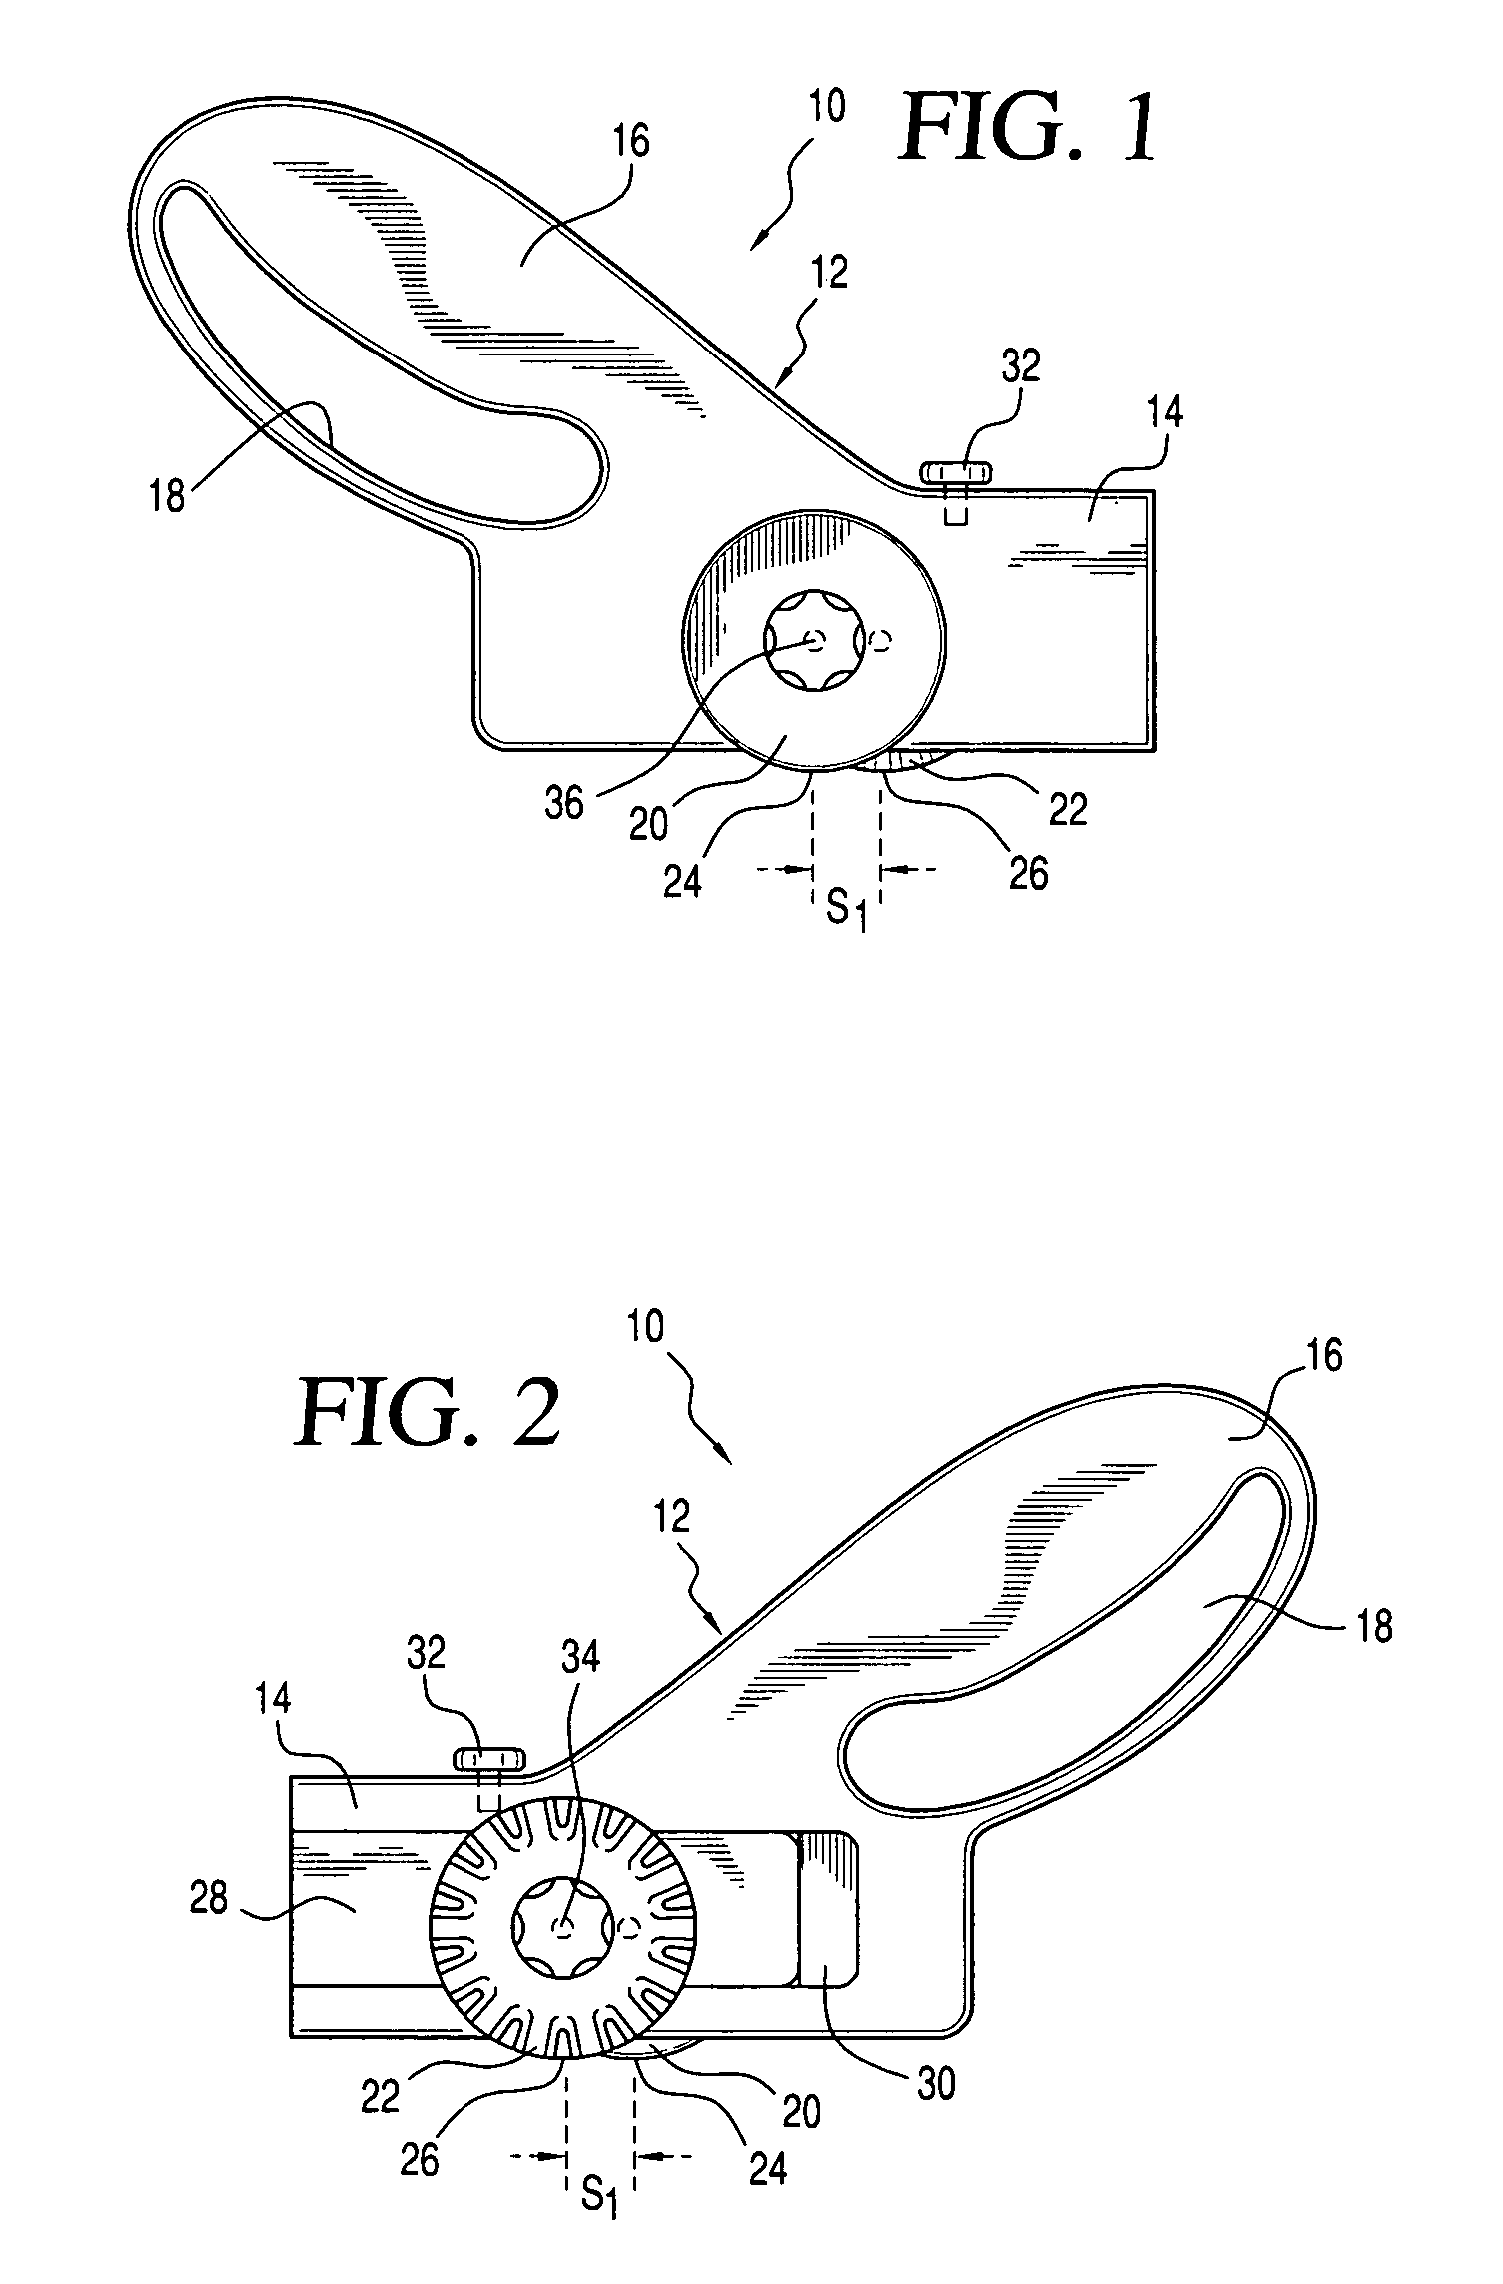 Cutting devices